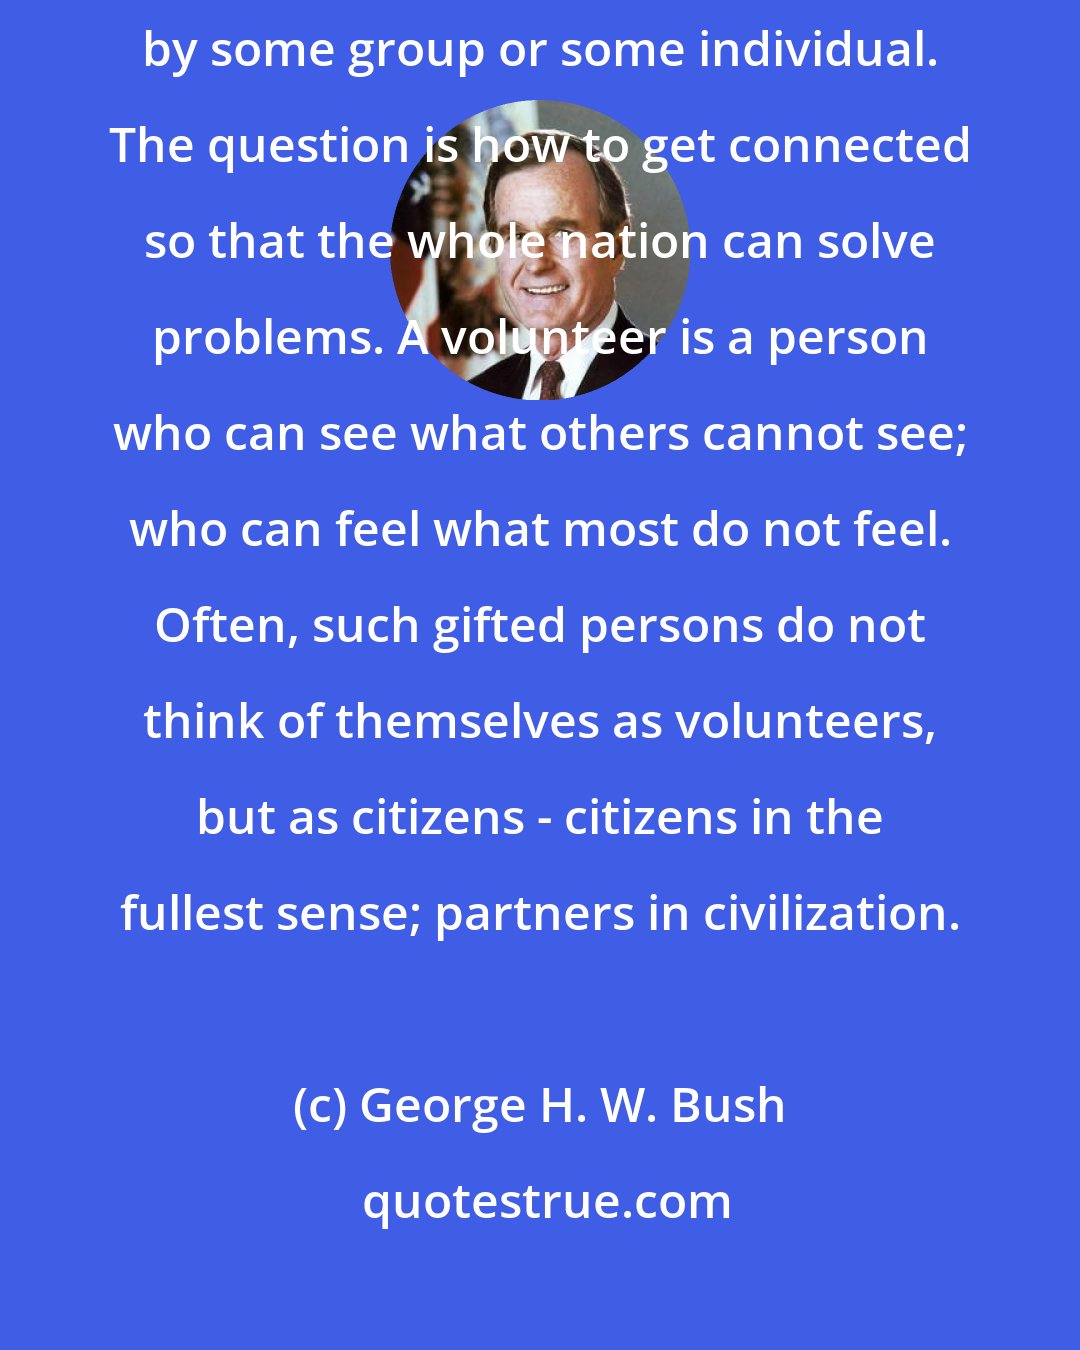 George H. W. Bush: Every problem that the country faces is being solved in some community by some group or some individual. The question is how to get connected so that the whole nation can solve problems. A volunteer is a person who can see what others cannot see; who can feel what most do not feel. Often, such gifted persons do not think of themselves as volunteers, but as citizens - citizens in the fullest sense; partners in civilization.